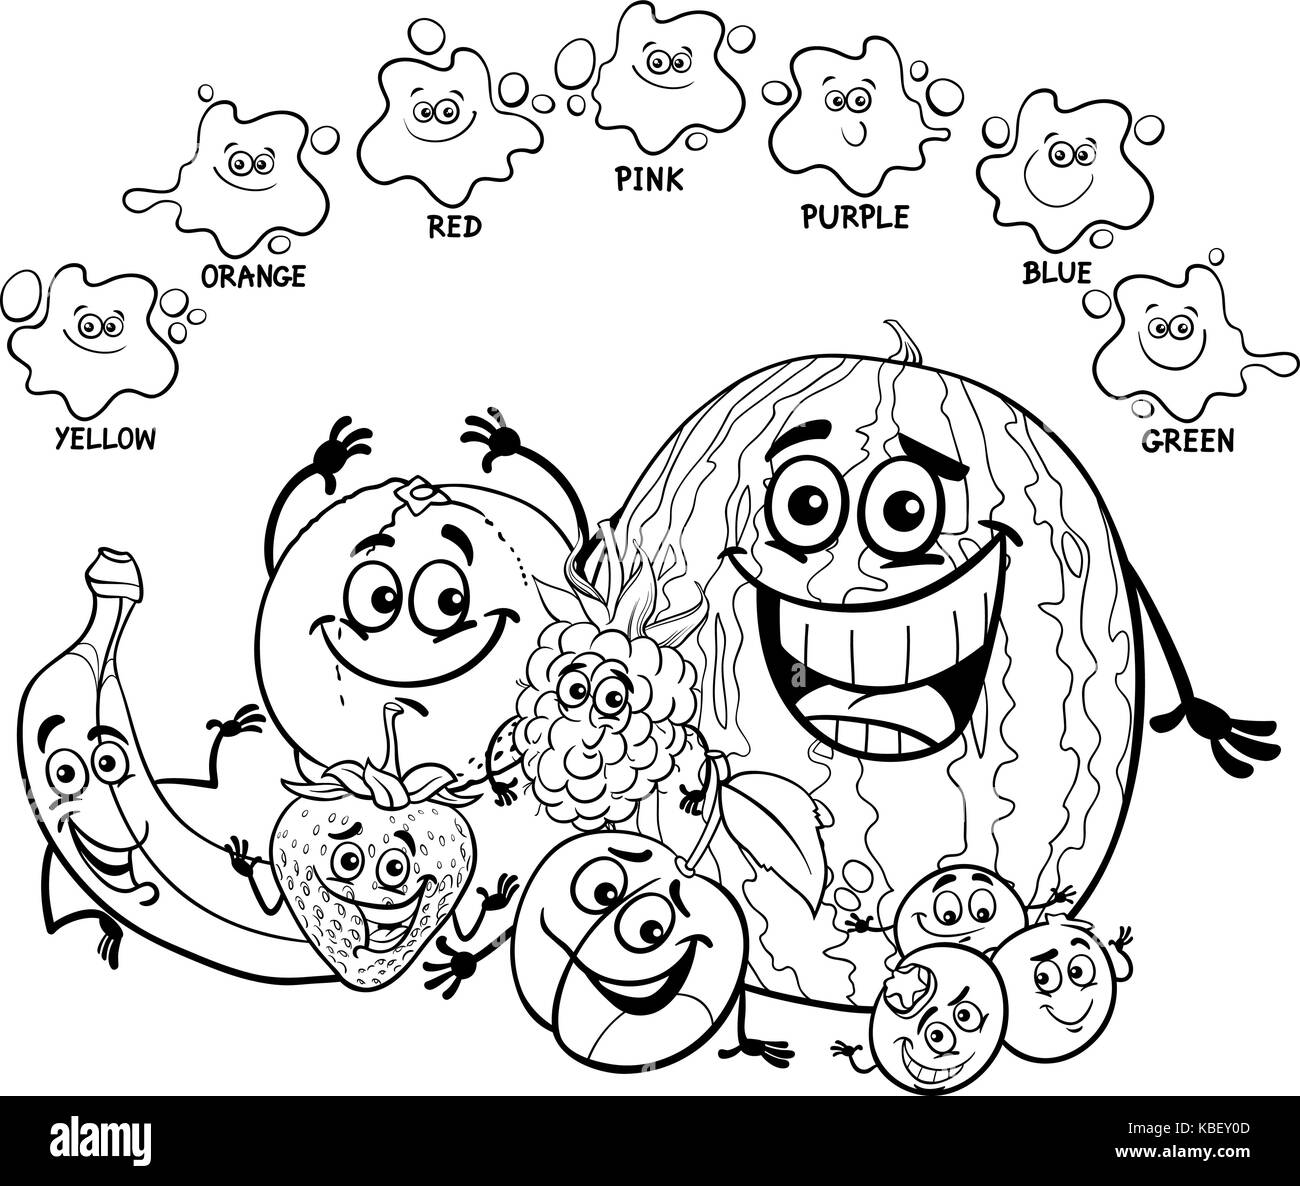 Black and White Cartoon Illustration of Primary Basic Colors Educational Page for Children with Fruits Food Characters Coloring Book Stock Vector